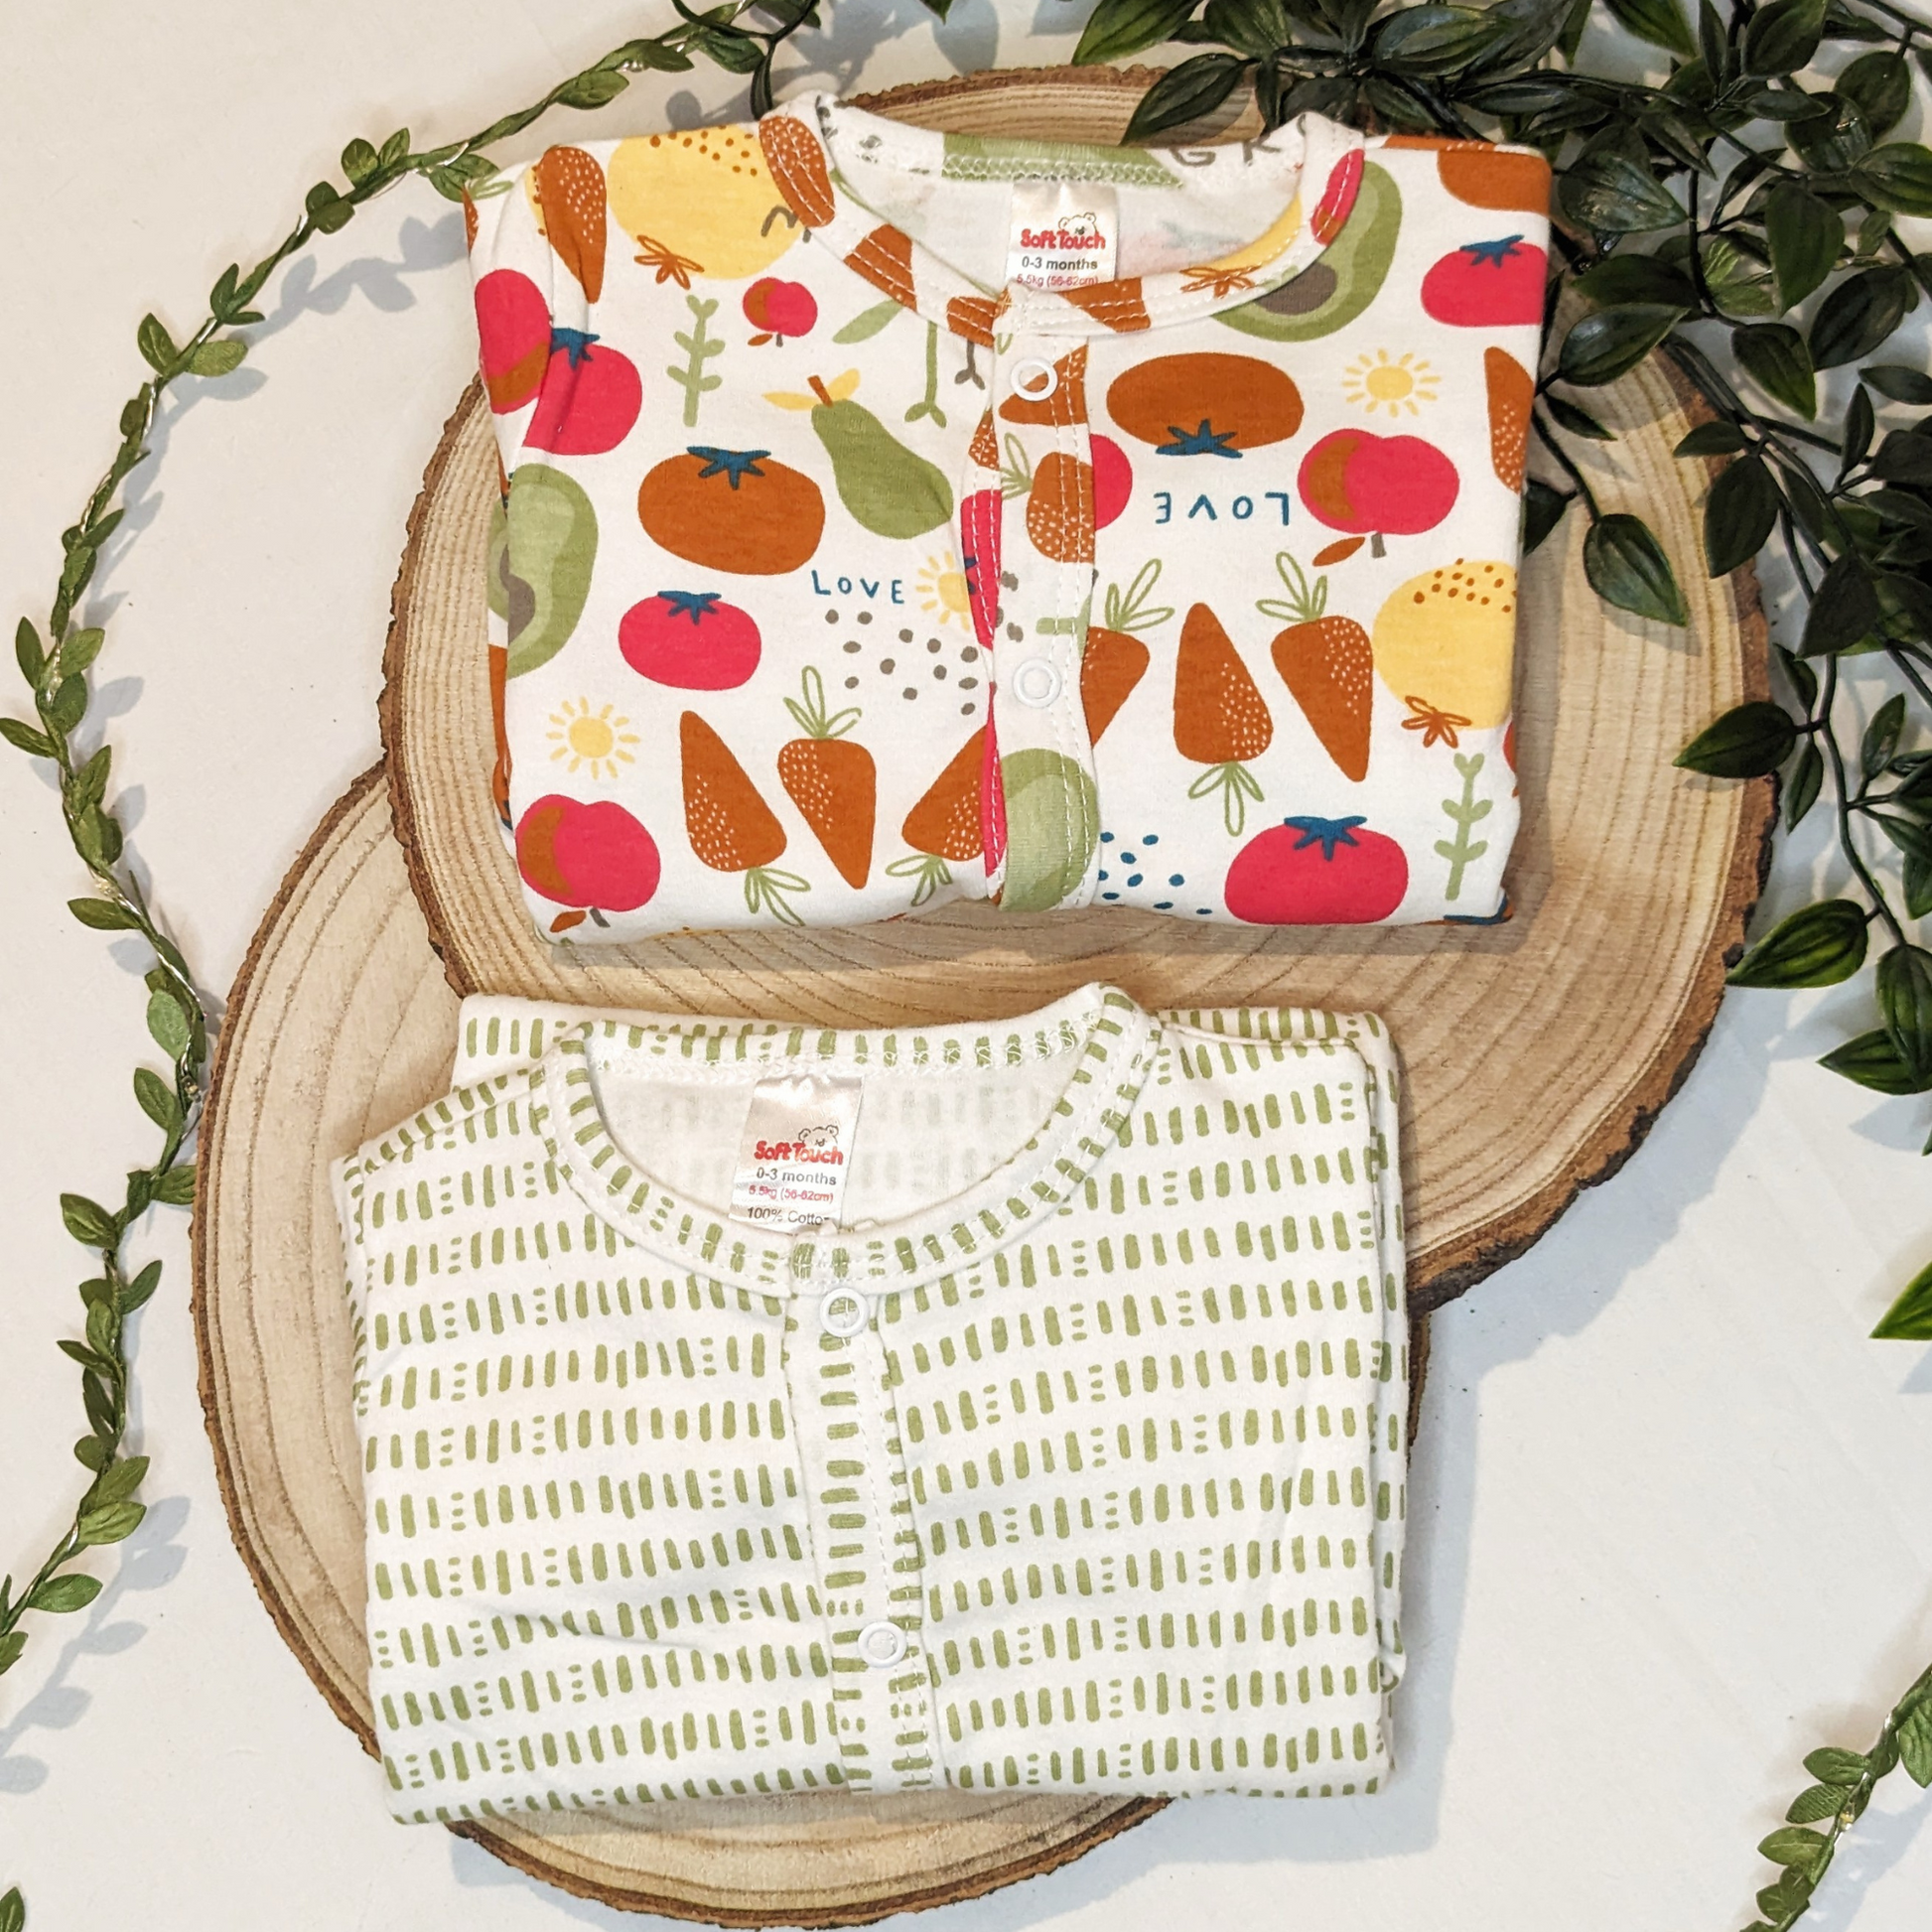 Two vibrant vegetable-themed baby sleepsuits made of 100% cotton for ultimate comfort, with matching accessories available